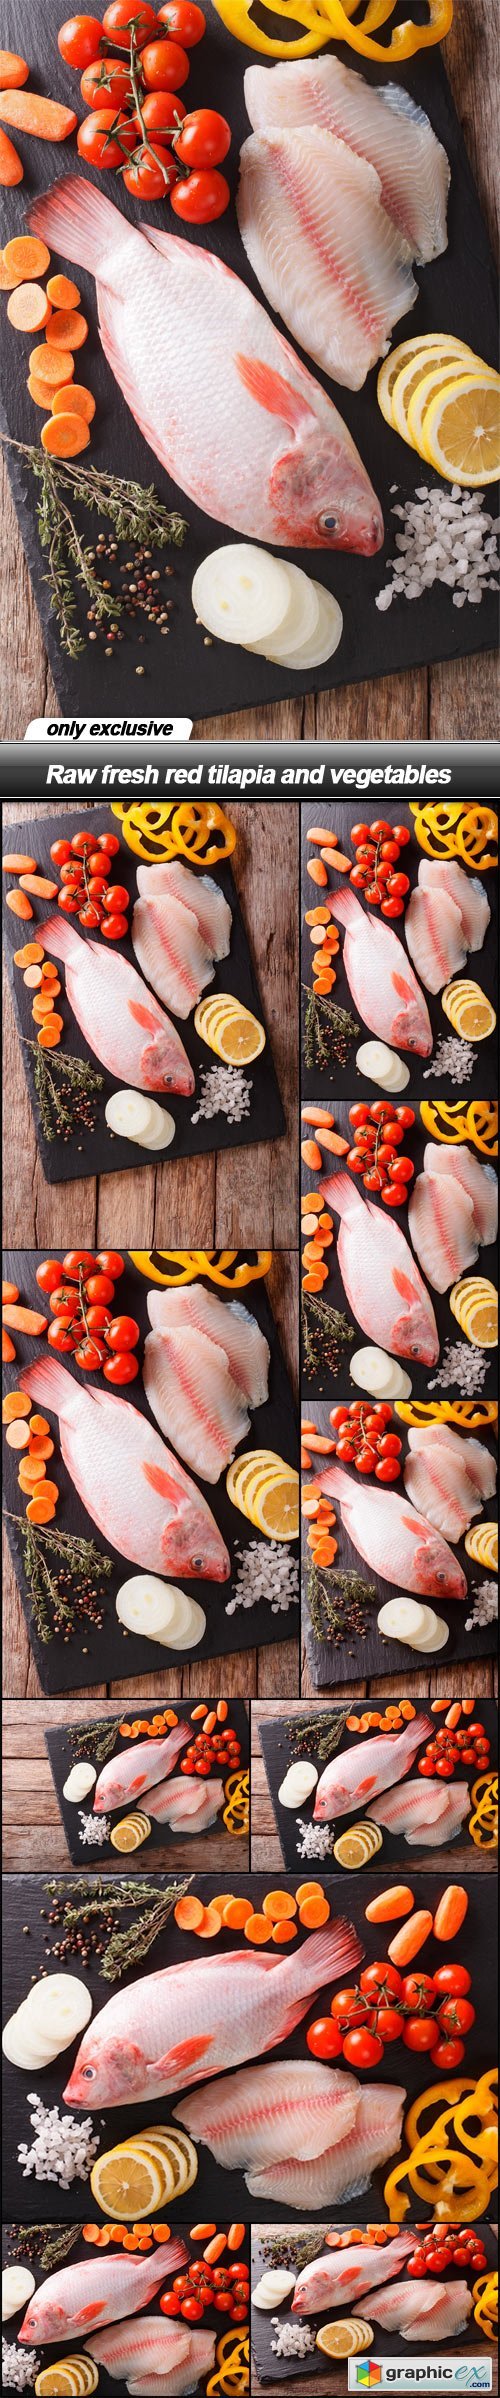 Raw fresh red tilapia and vegetables - 10 UHQ JPEG